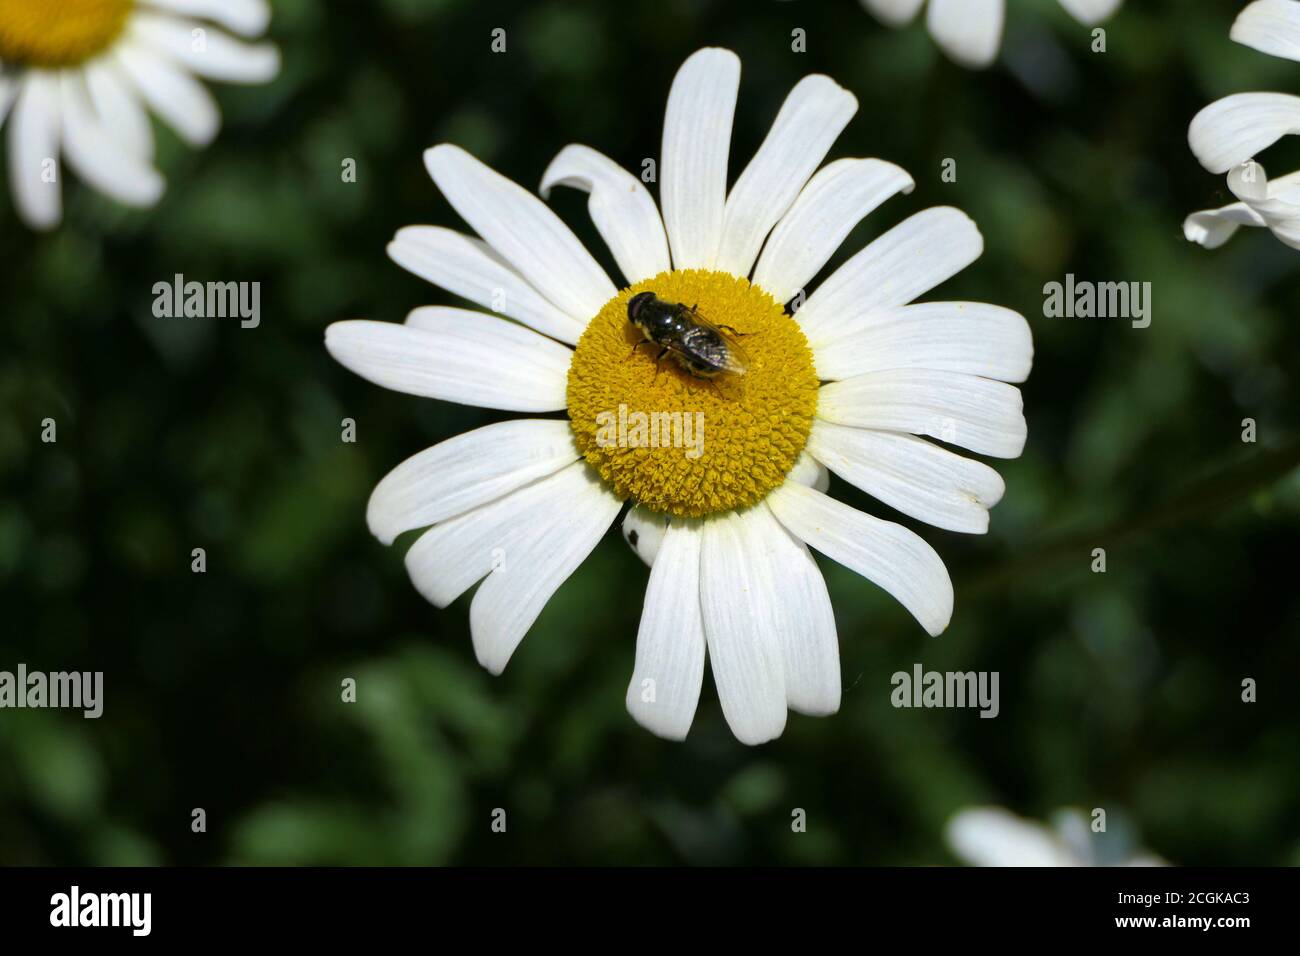 Beautiful closeup flower head of a sunlit oxeye daisy or dog daisy from above in a garden with a fly sitting on it Stock Photo